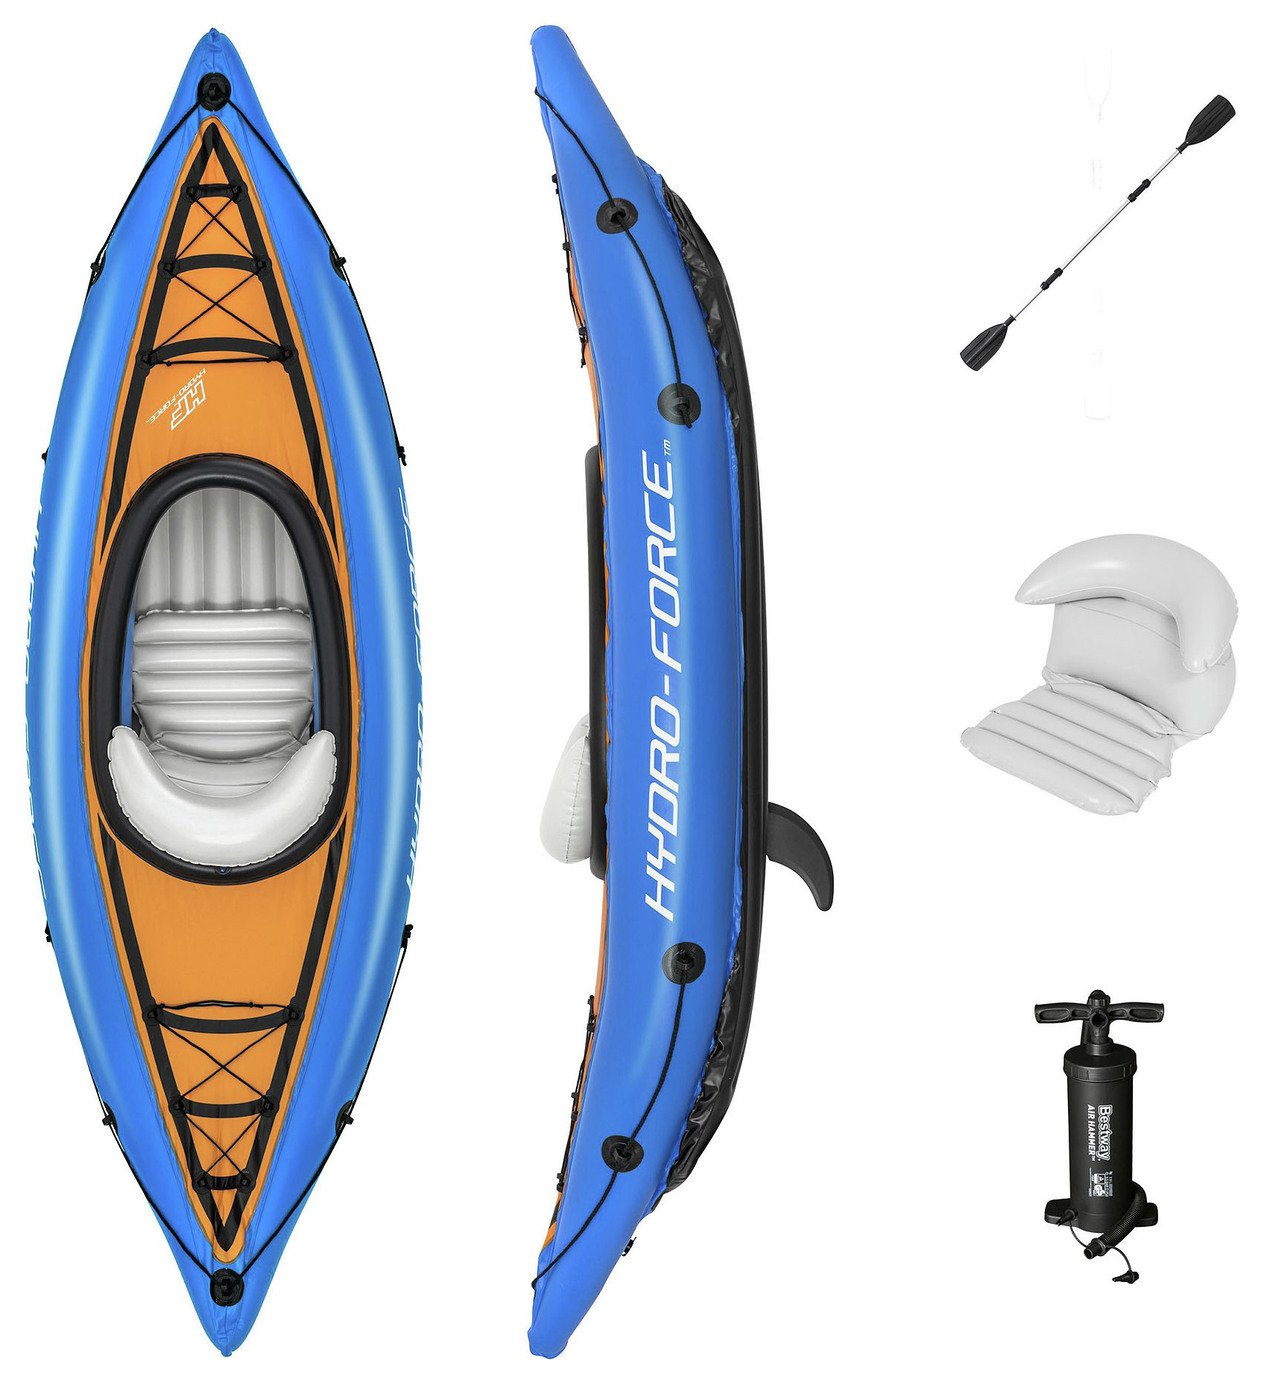 Bestway Hydro-Force Cove Champion Inflatable Kayak